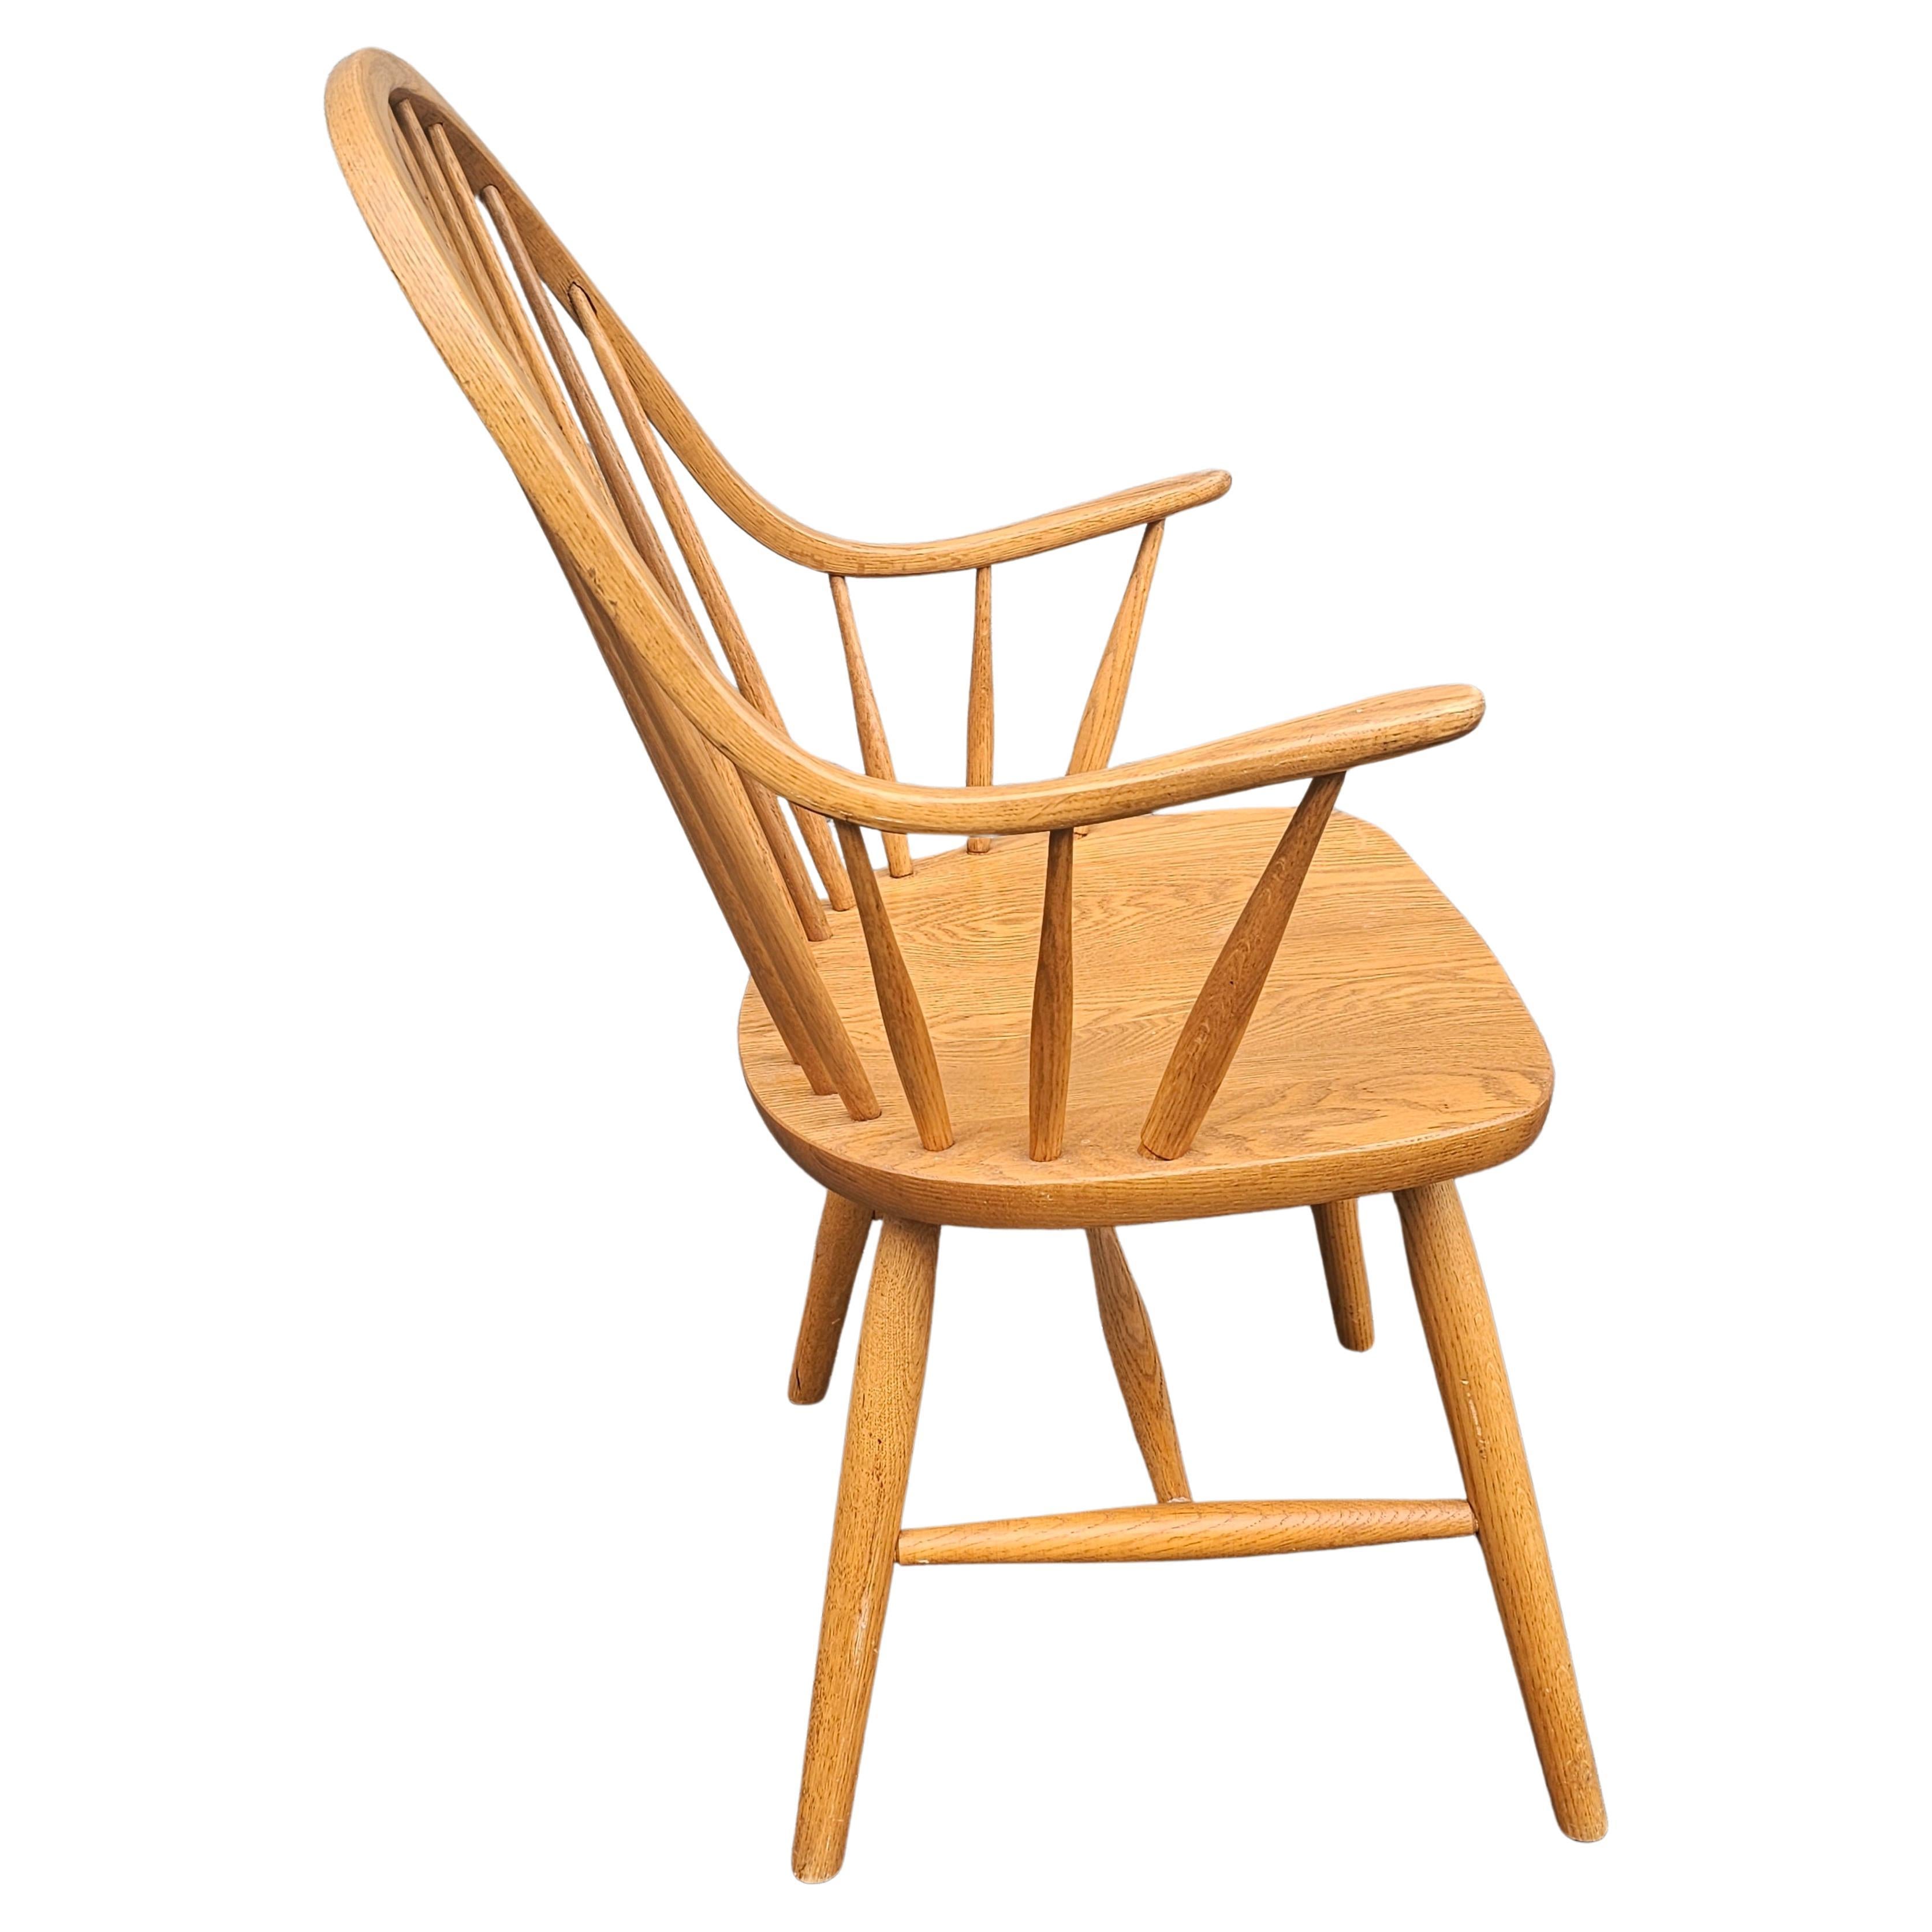 A Late 20th Century Amish crafted Oak Continuous Windsor Armchair with Spindle Back. A true definition of elegance and simplicity. Measures 23.25